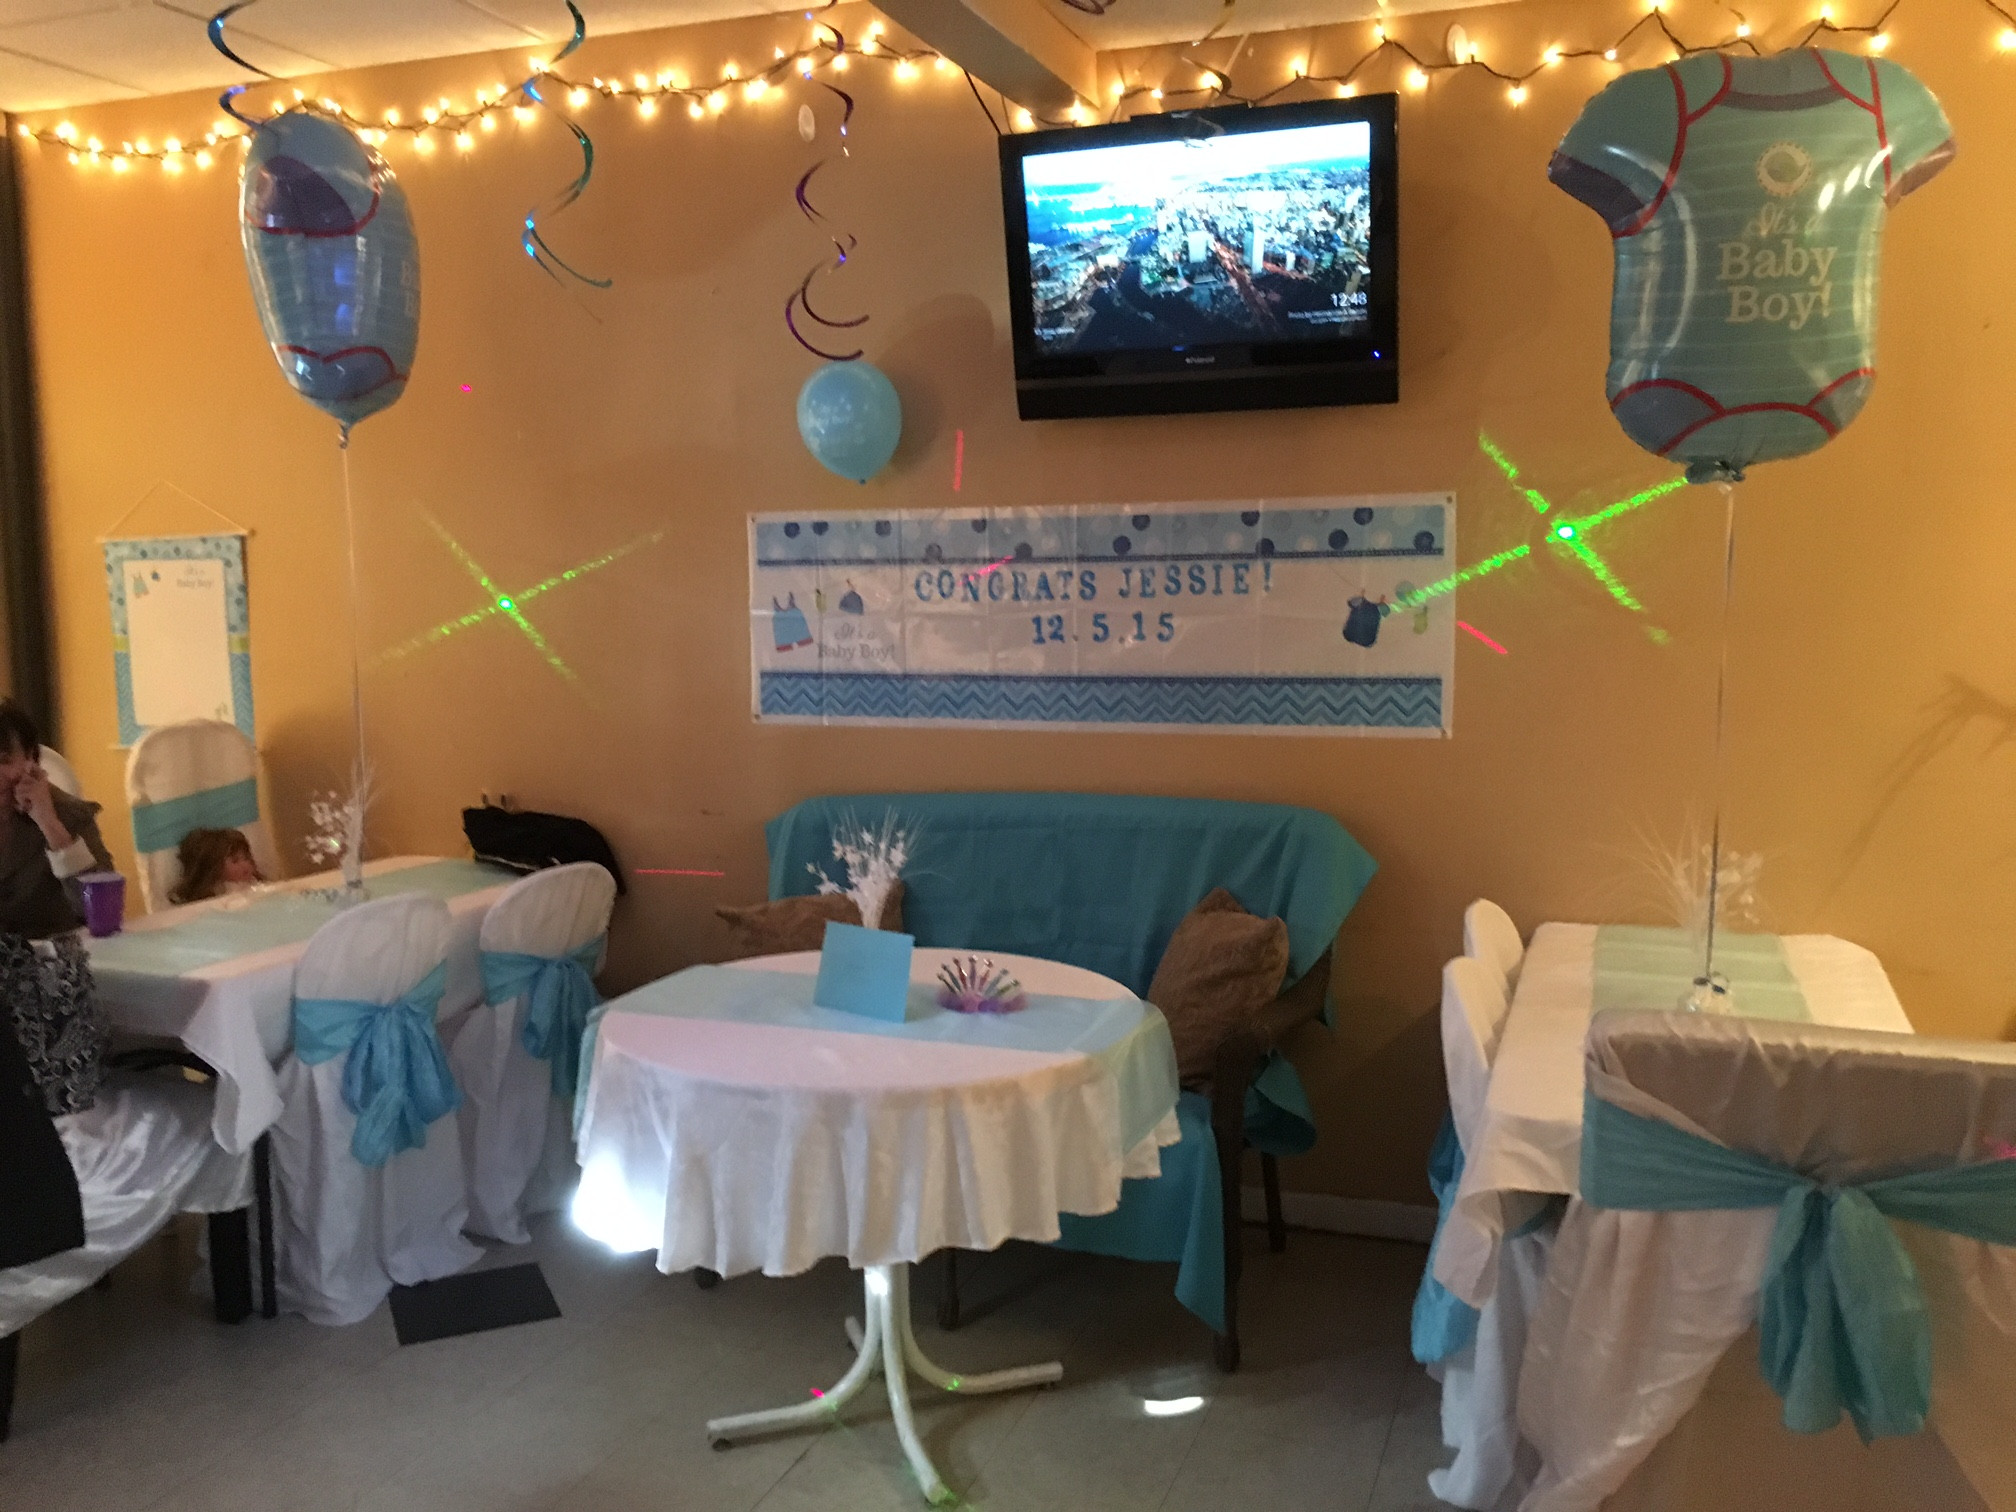 Party Room Rentals For Baby Shower
 Susan s House of Magic